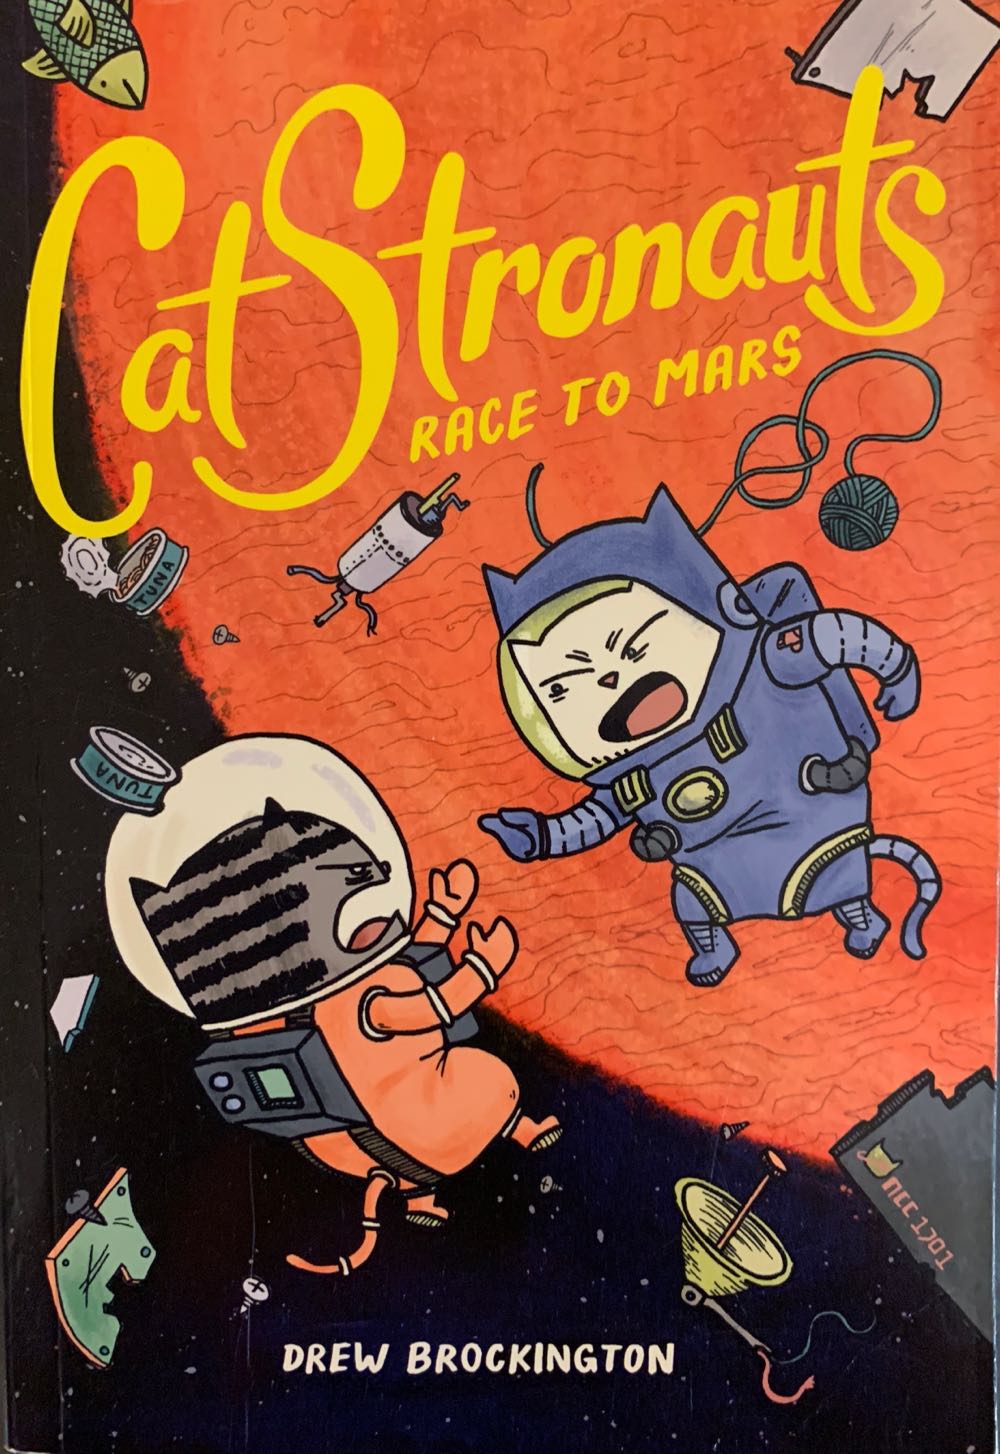 CatStronauts, Book 2: Race to Mars - Drew Brockington (Little, Brown Books for Young Readers) book collectible [Barcode 9780316307505] - Main Image 1